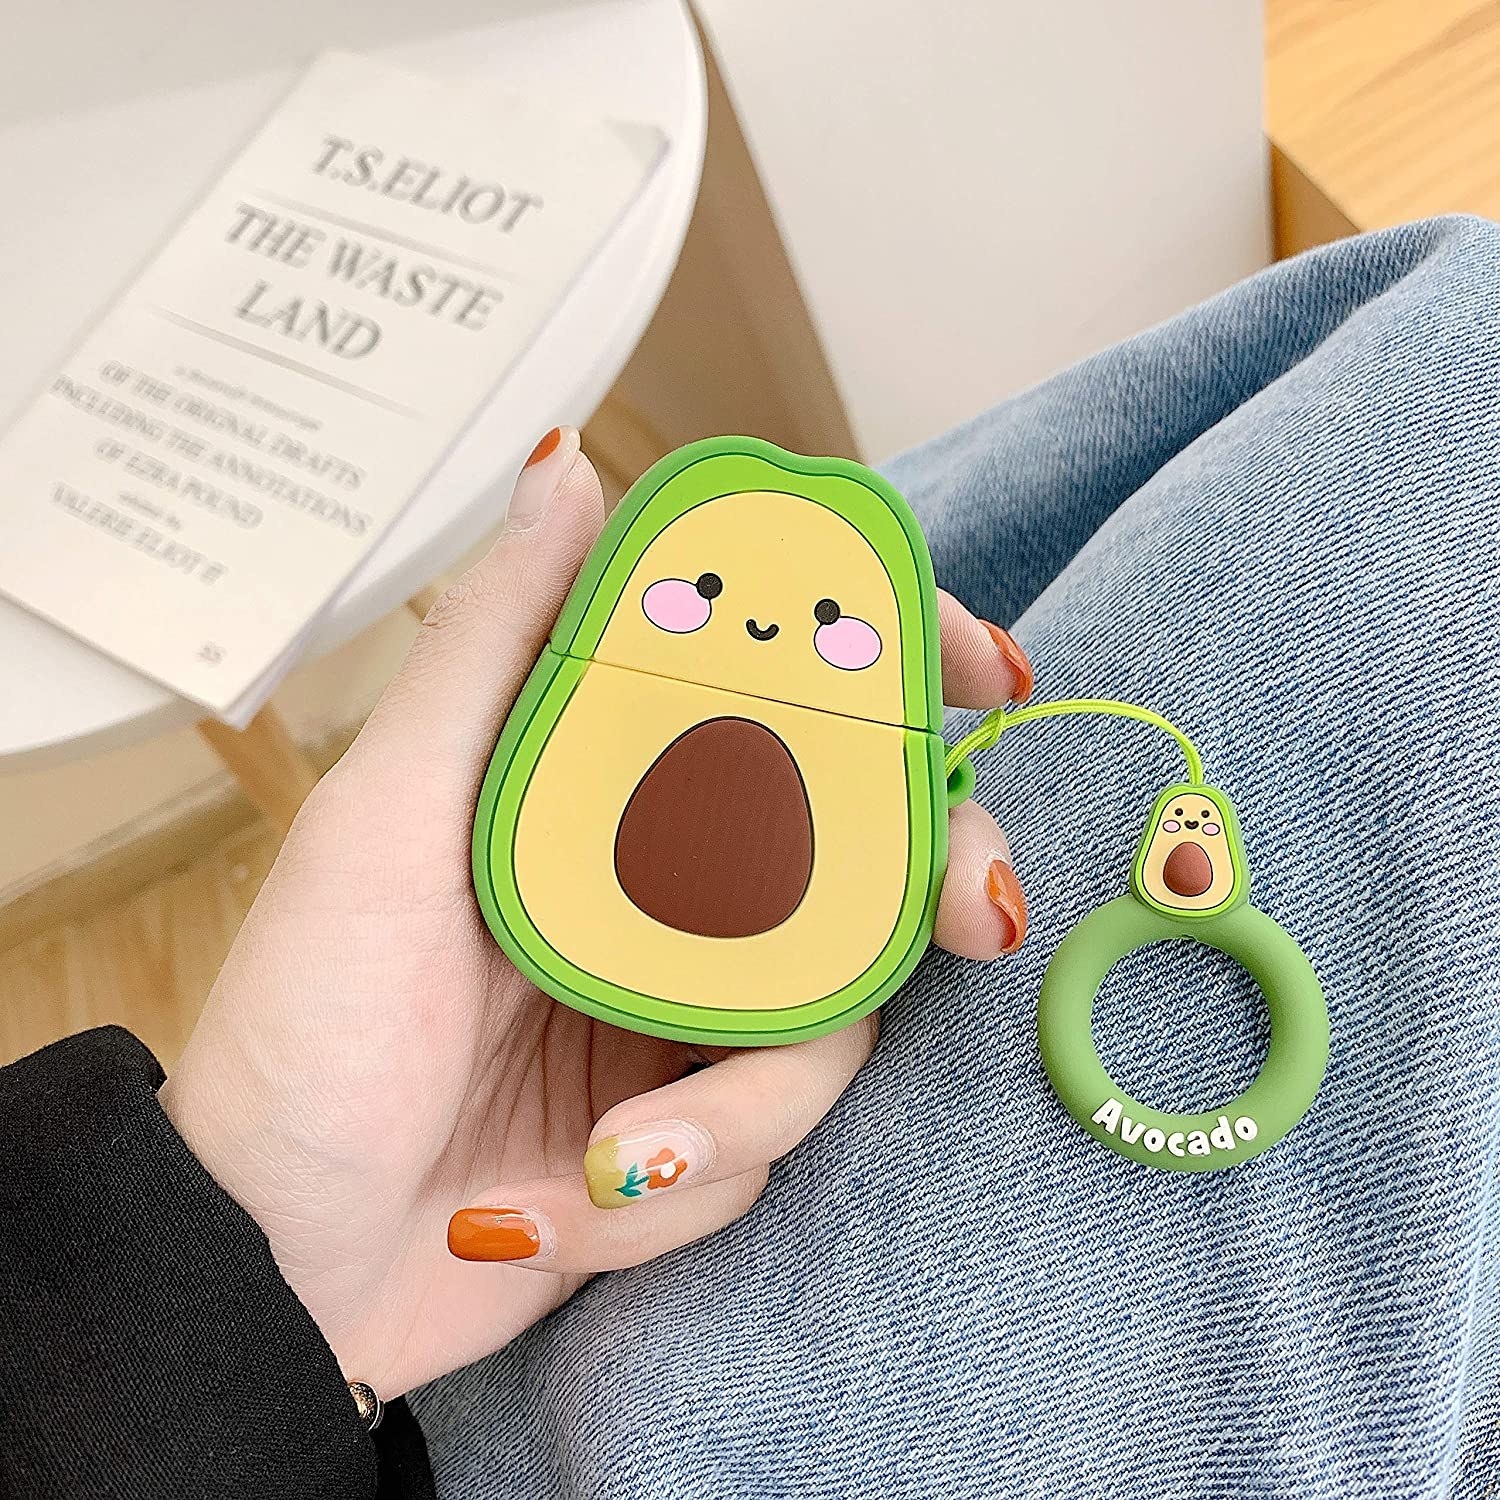 A person holding the avocado earbud case